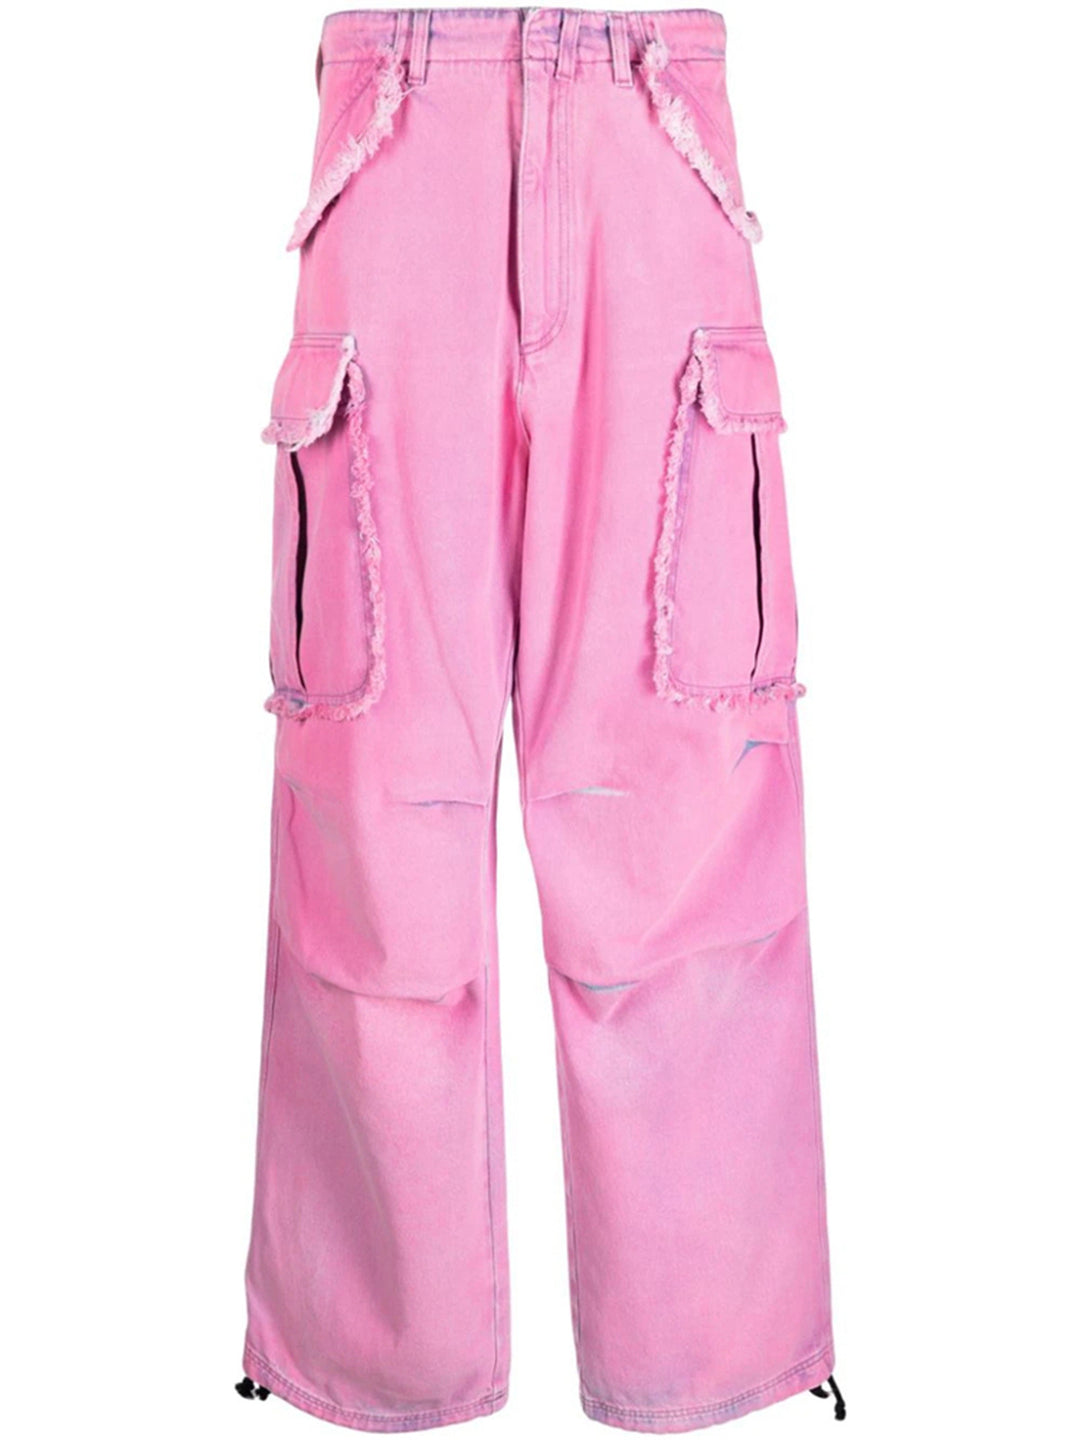 Pink Jeans Women Spring Summer Washed Old Japanese Sweet Cool Sexy Straight Cargo Pants Loose Hole Trousers